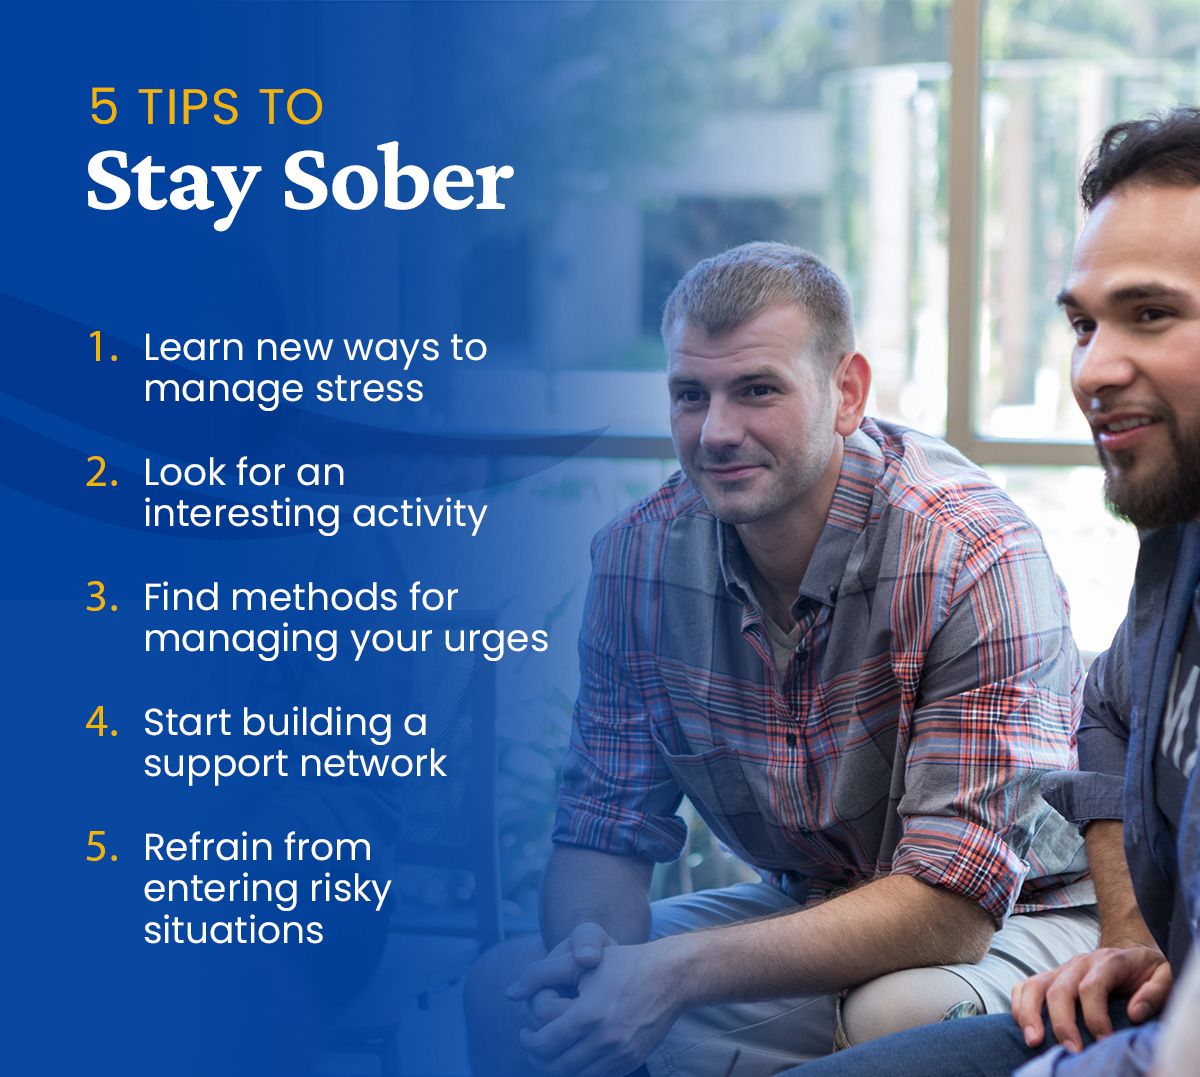 5 tips to help you stay sober